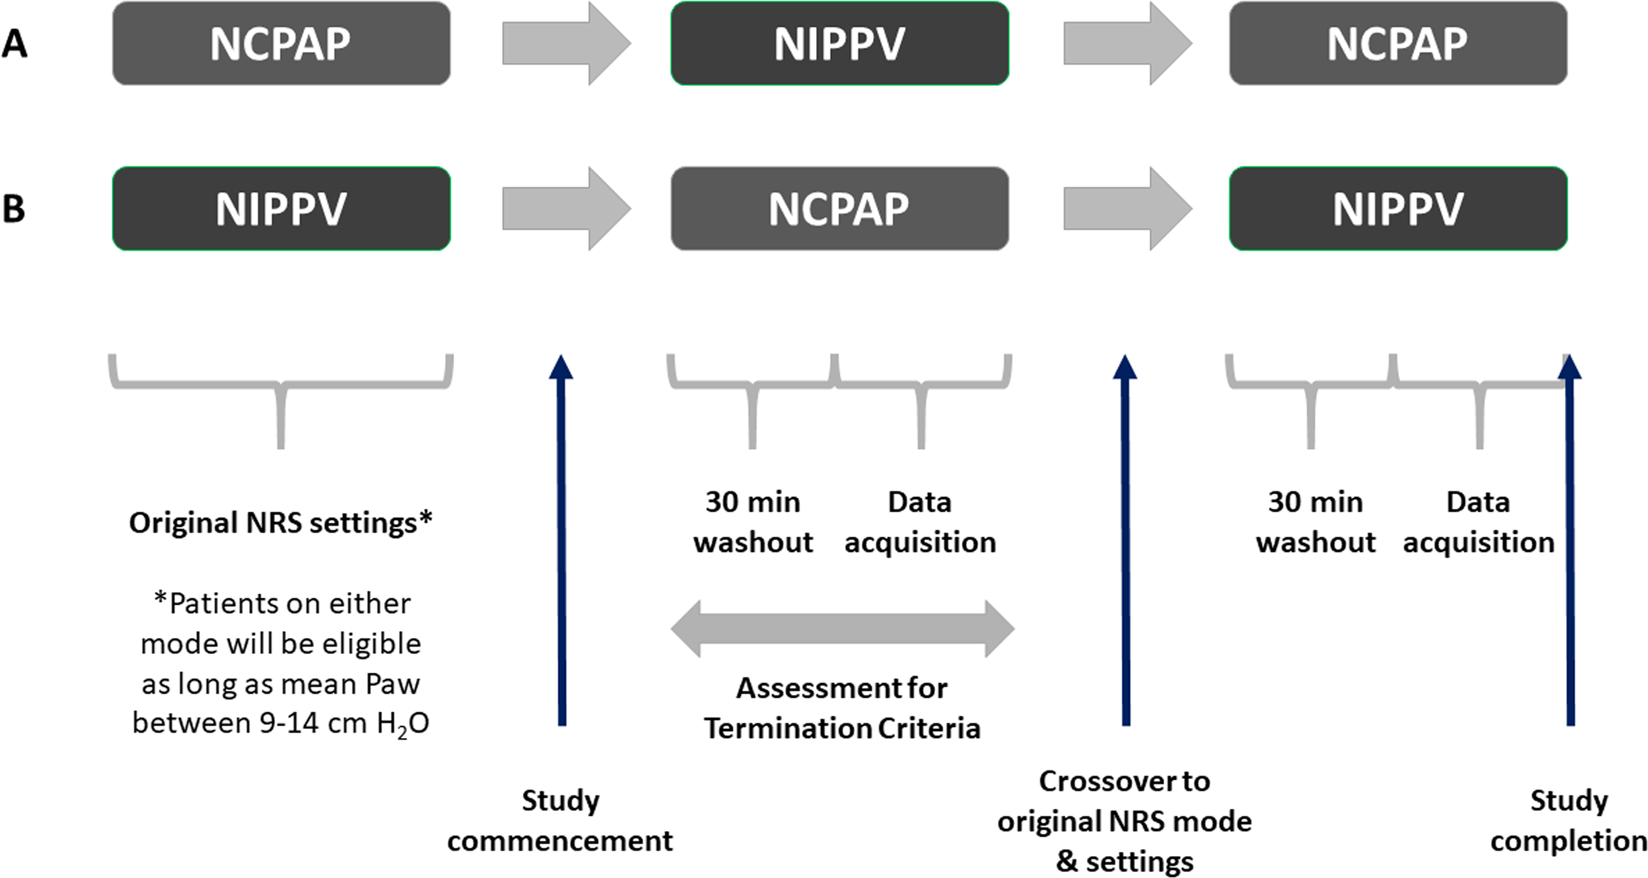 High CPAP vs. NIPPV in preterm neonates — A physiological cross-over study  | Journal of Perinatology